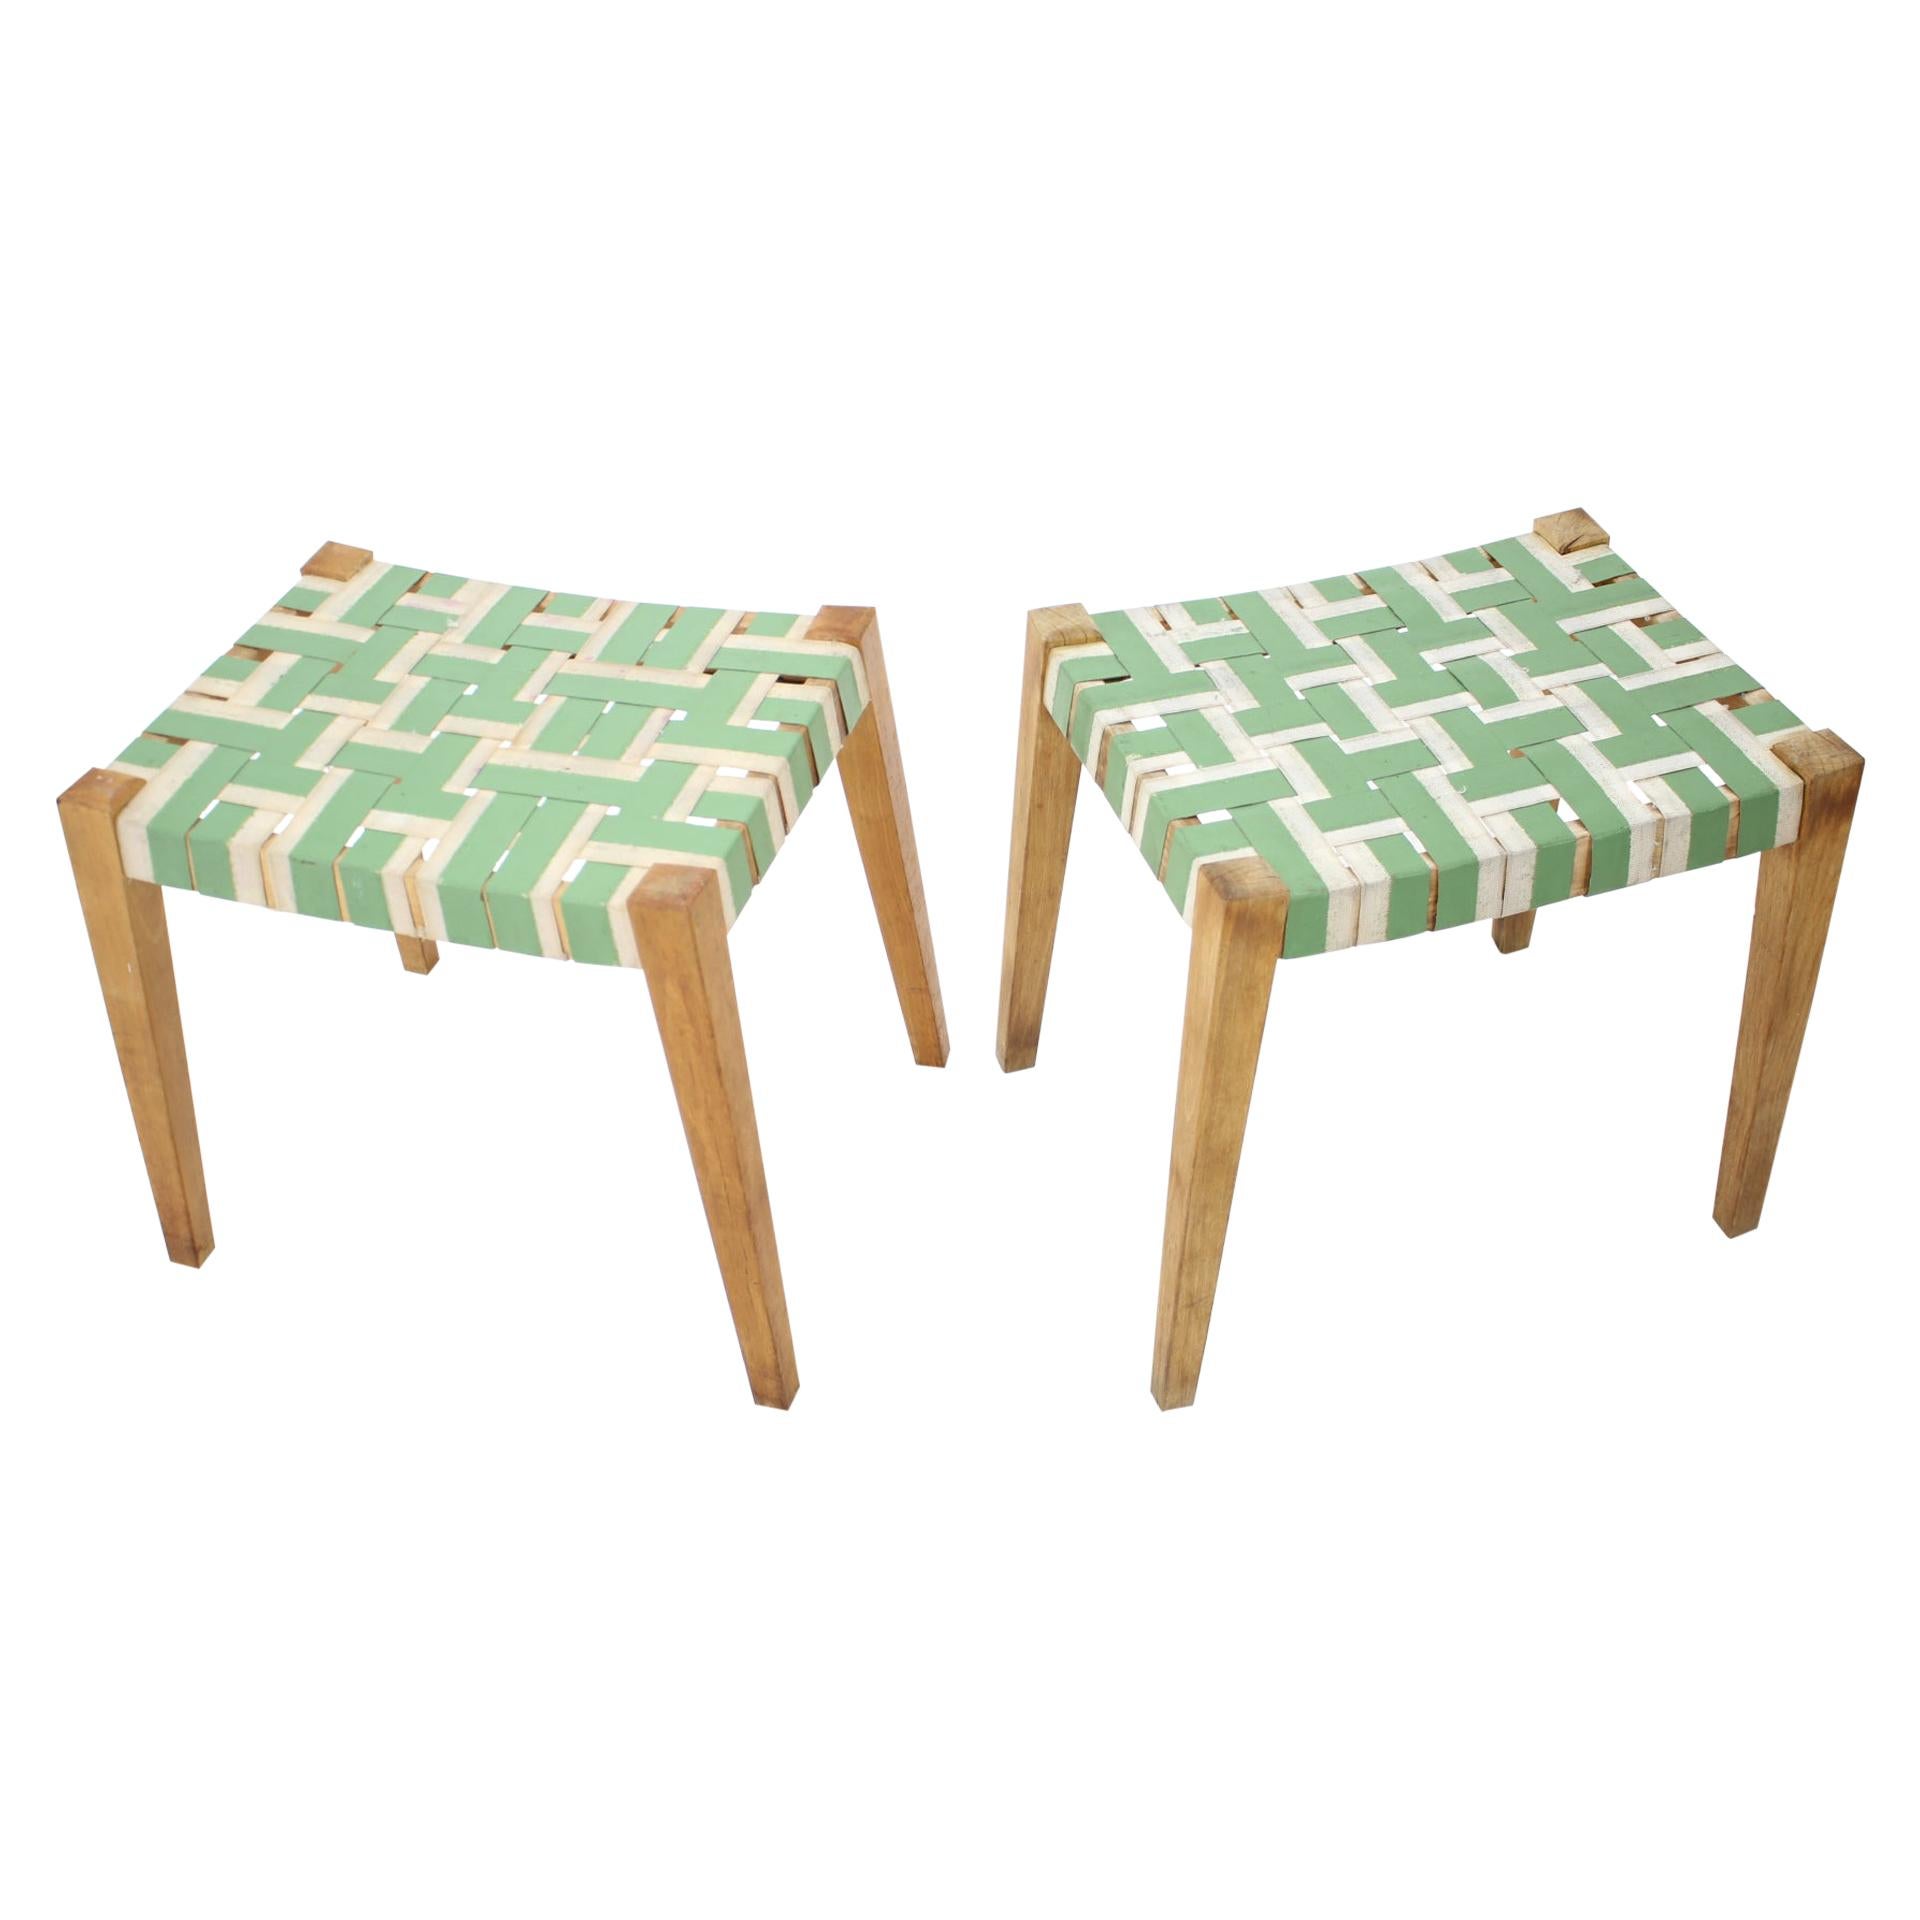 Pair of Midcentury Stools or Tabourets, 1950s